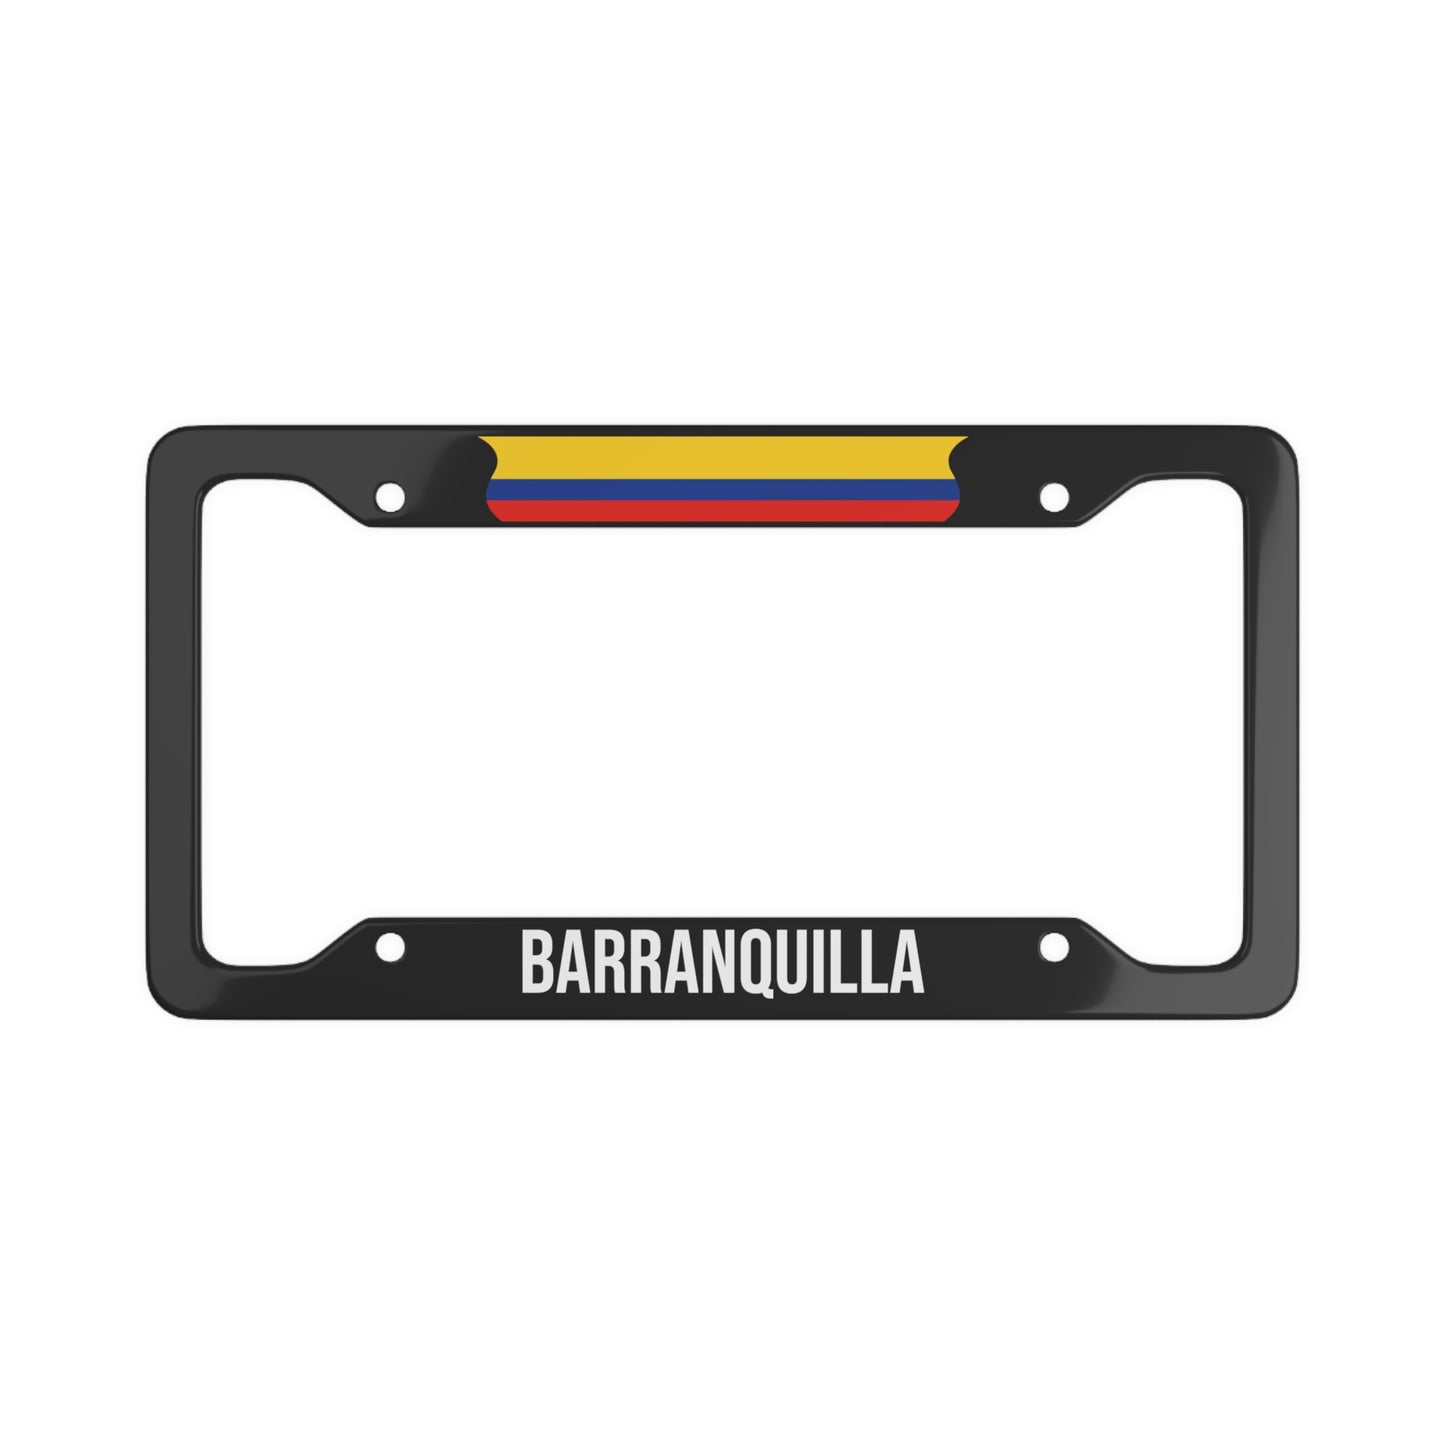 Barranquilla, Colombia Car Plate Frame